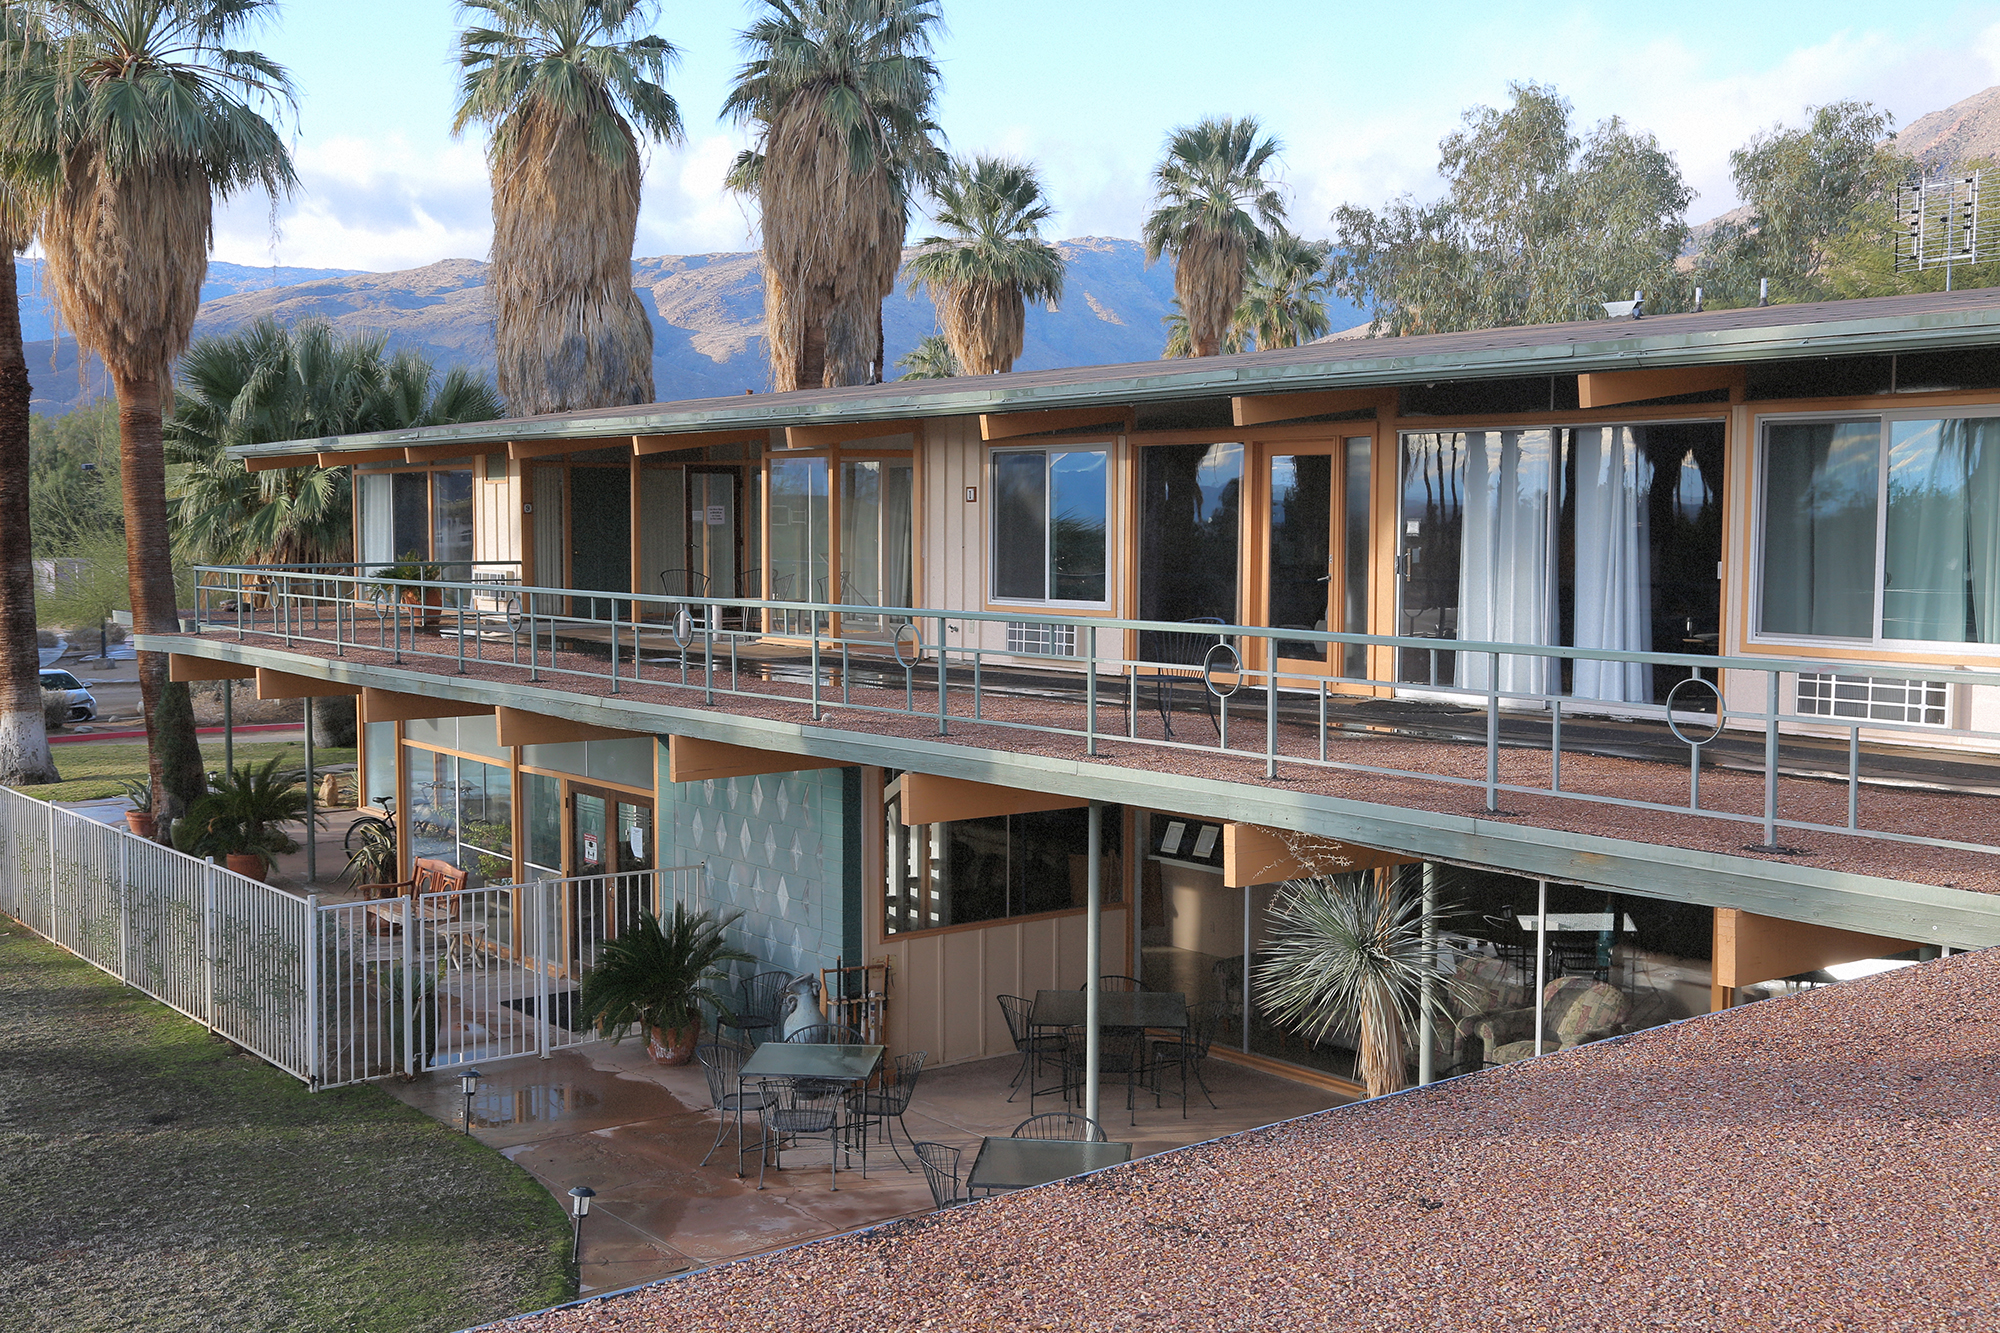 Exterior of the Palms at Indian Head Motel in Borrego Springs, California.